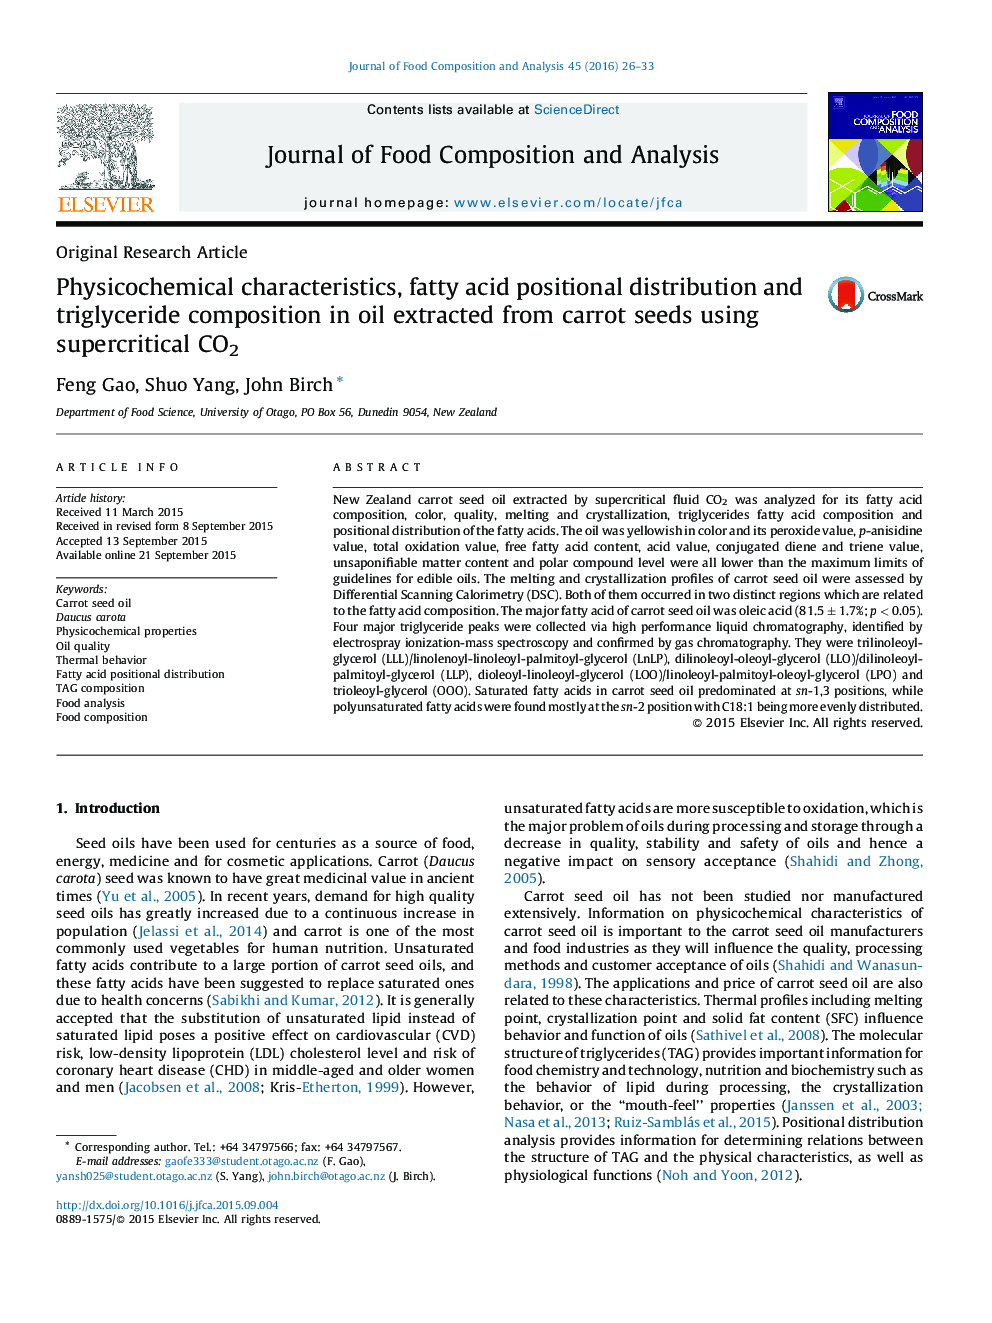 Physicochemical characteristics, fatty acid positional distribution and triglyceride composition in oil extracted from carrot seeds using supercritical CO2